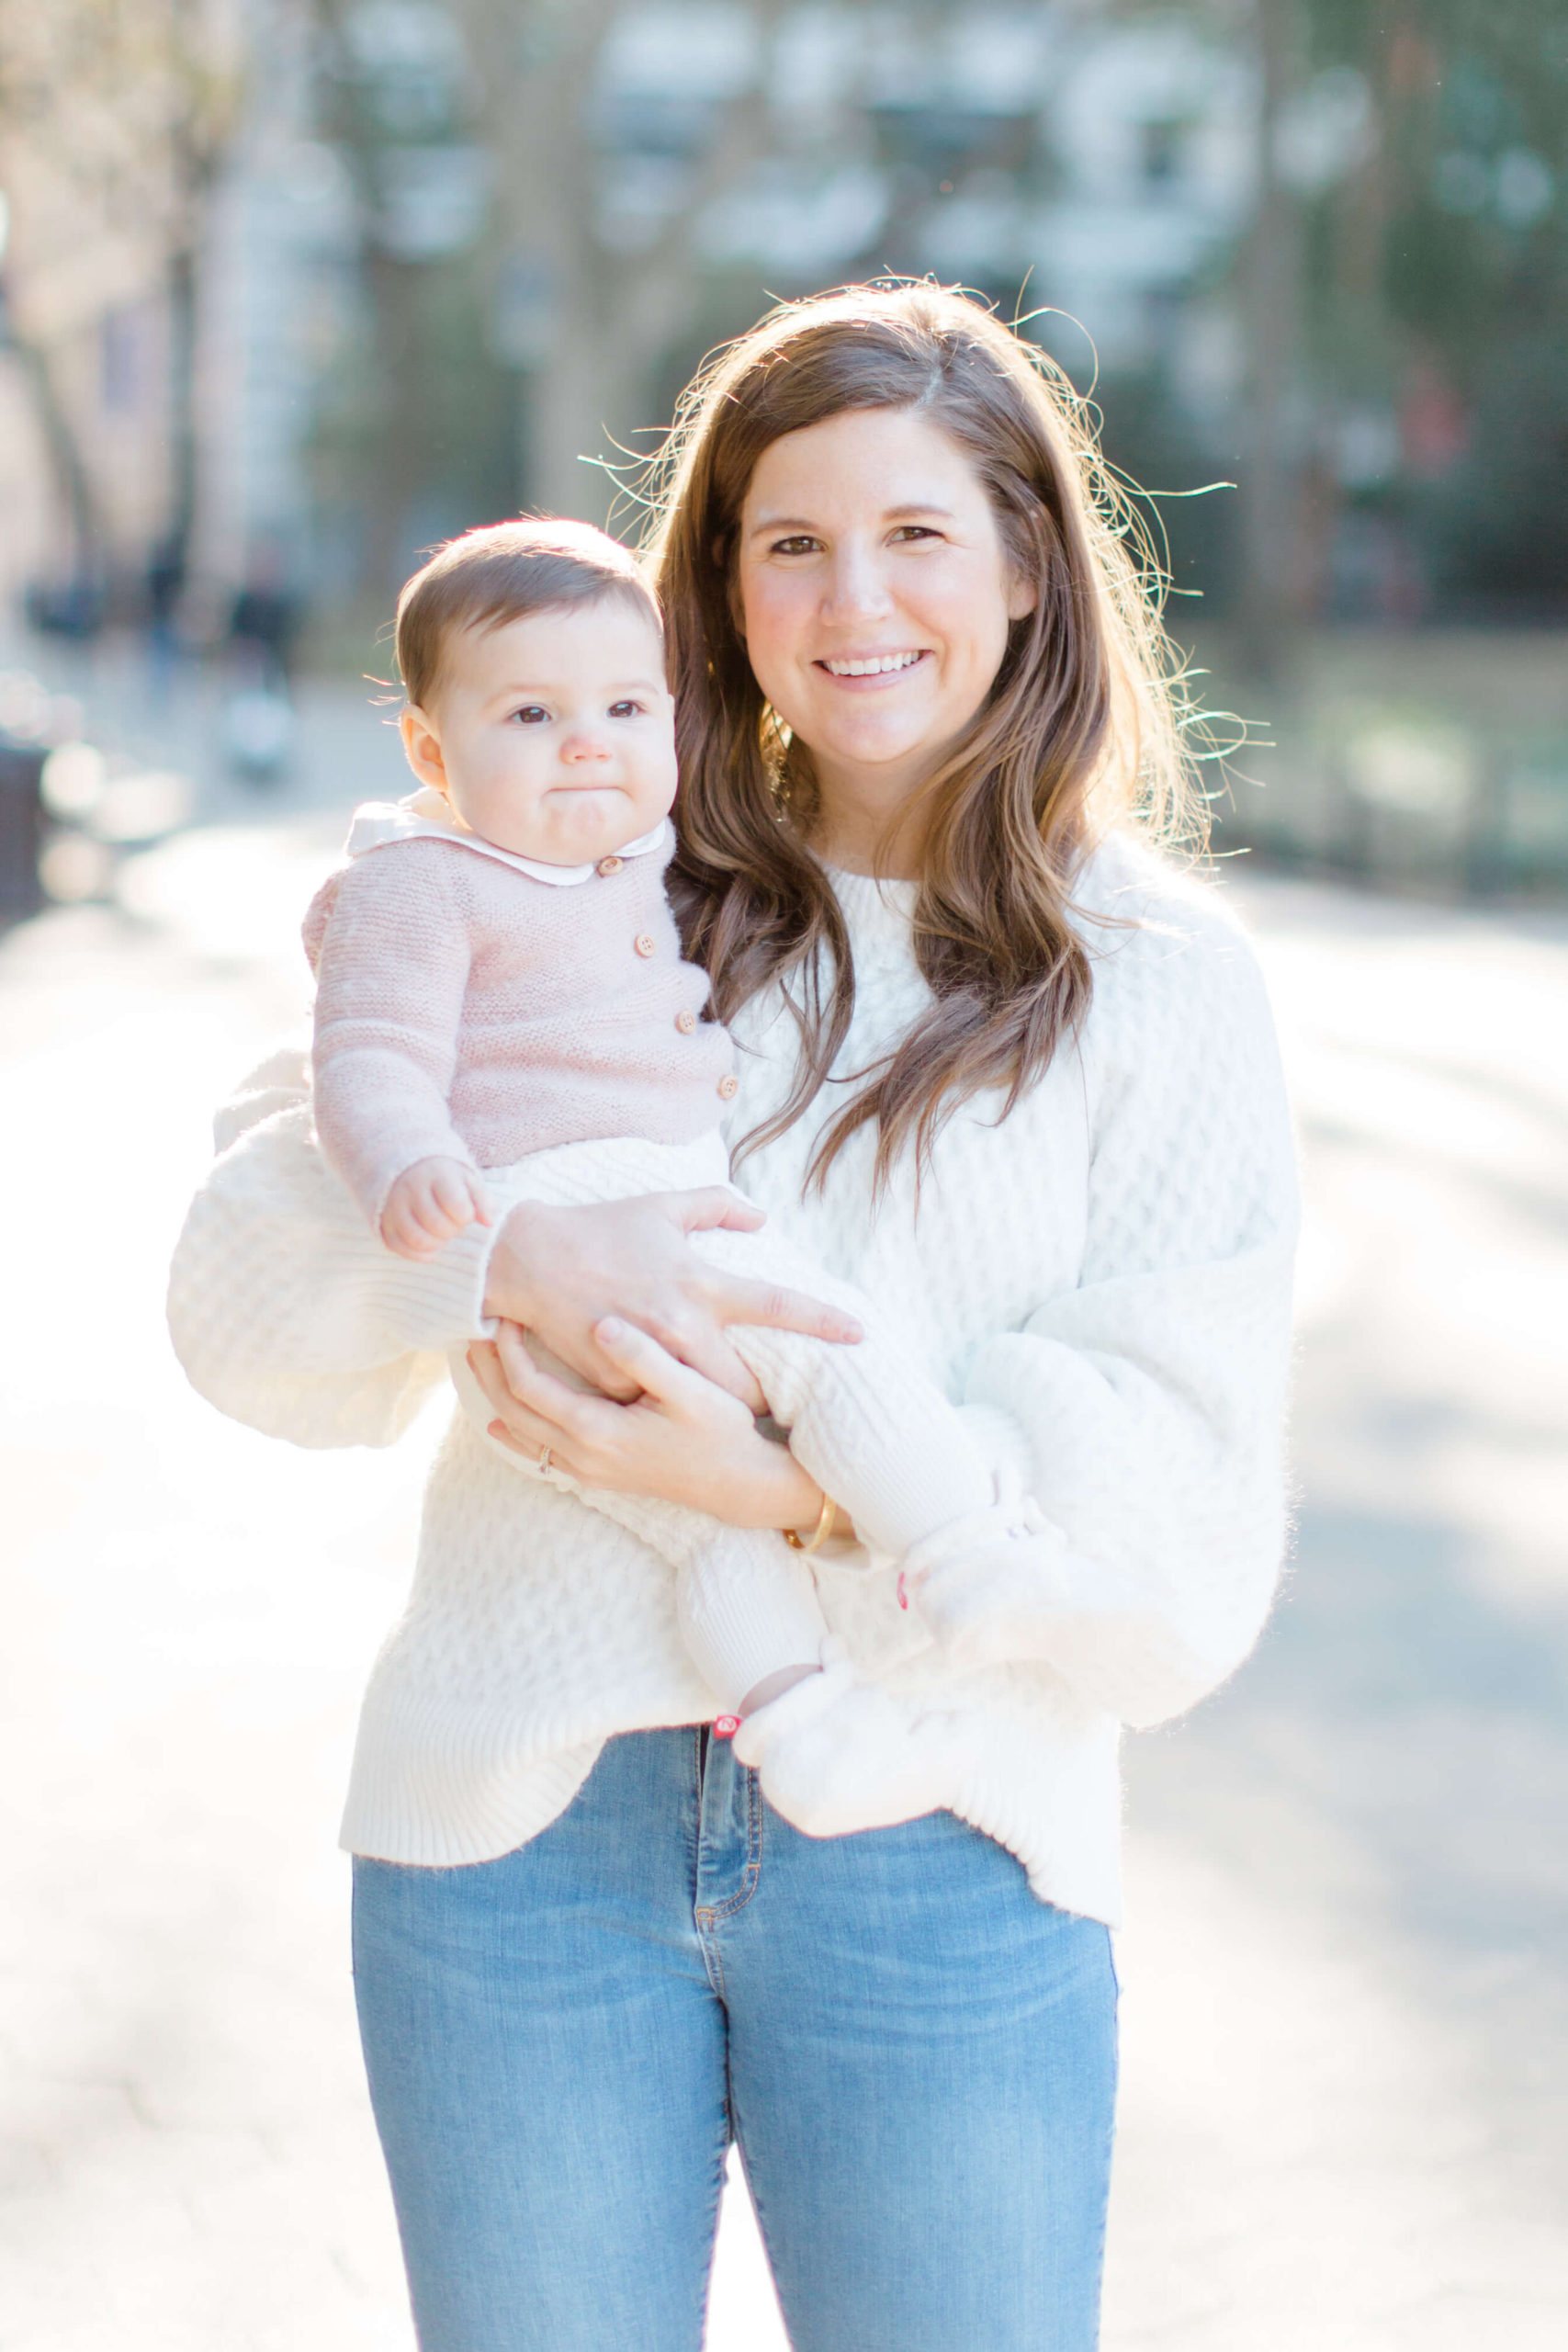 Family photography in Washington Square Park pictured by top NYC family photographer, Jacqueline Clair